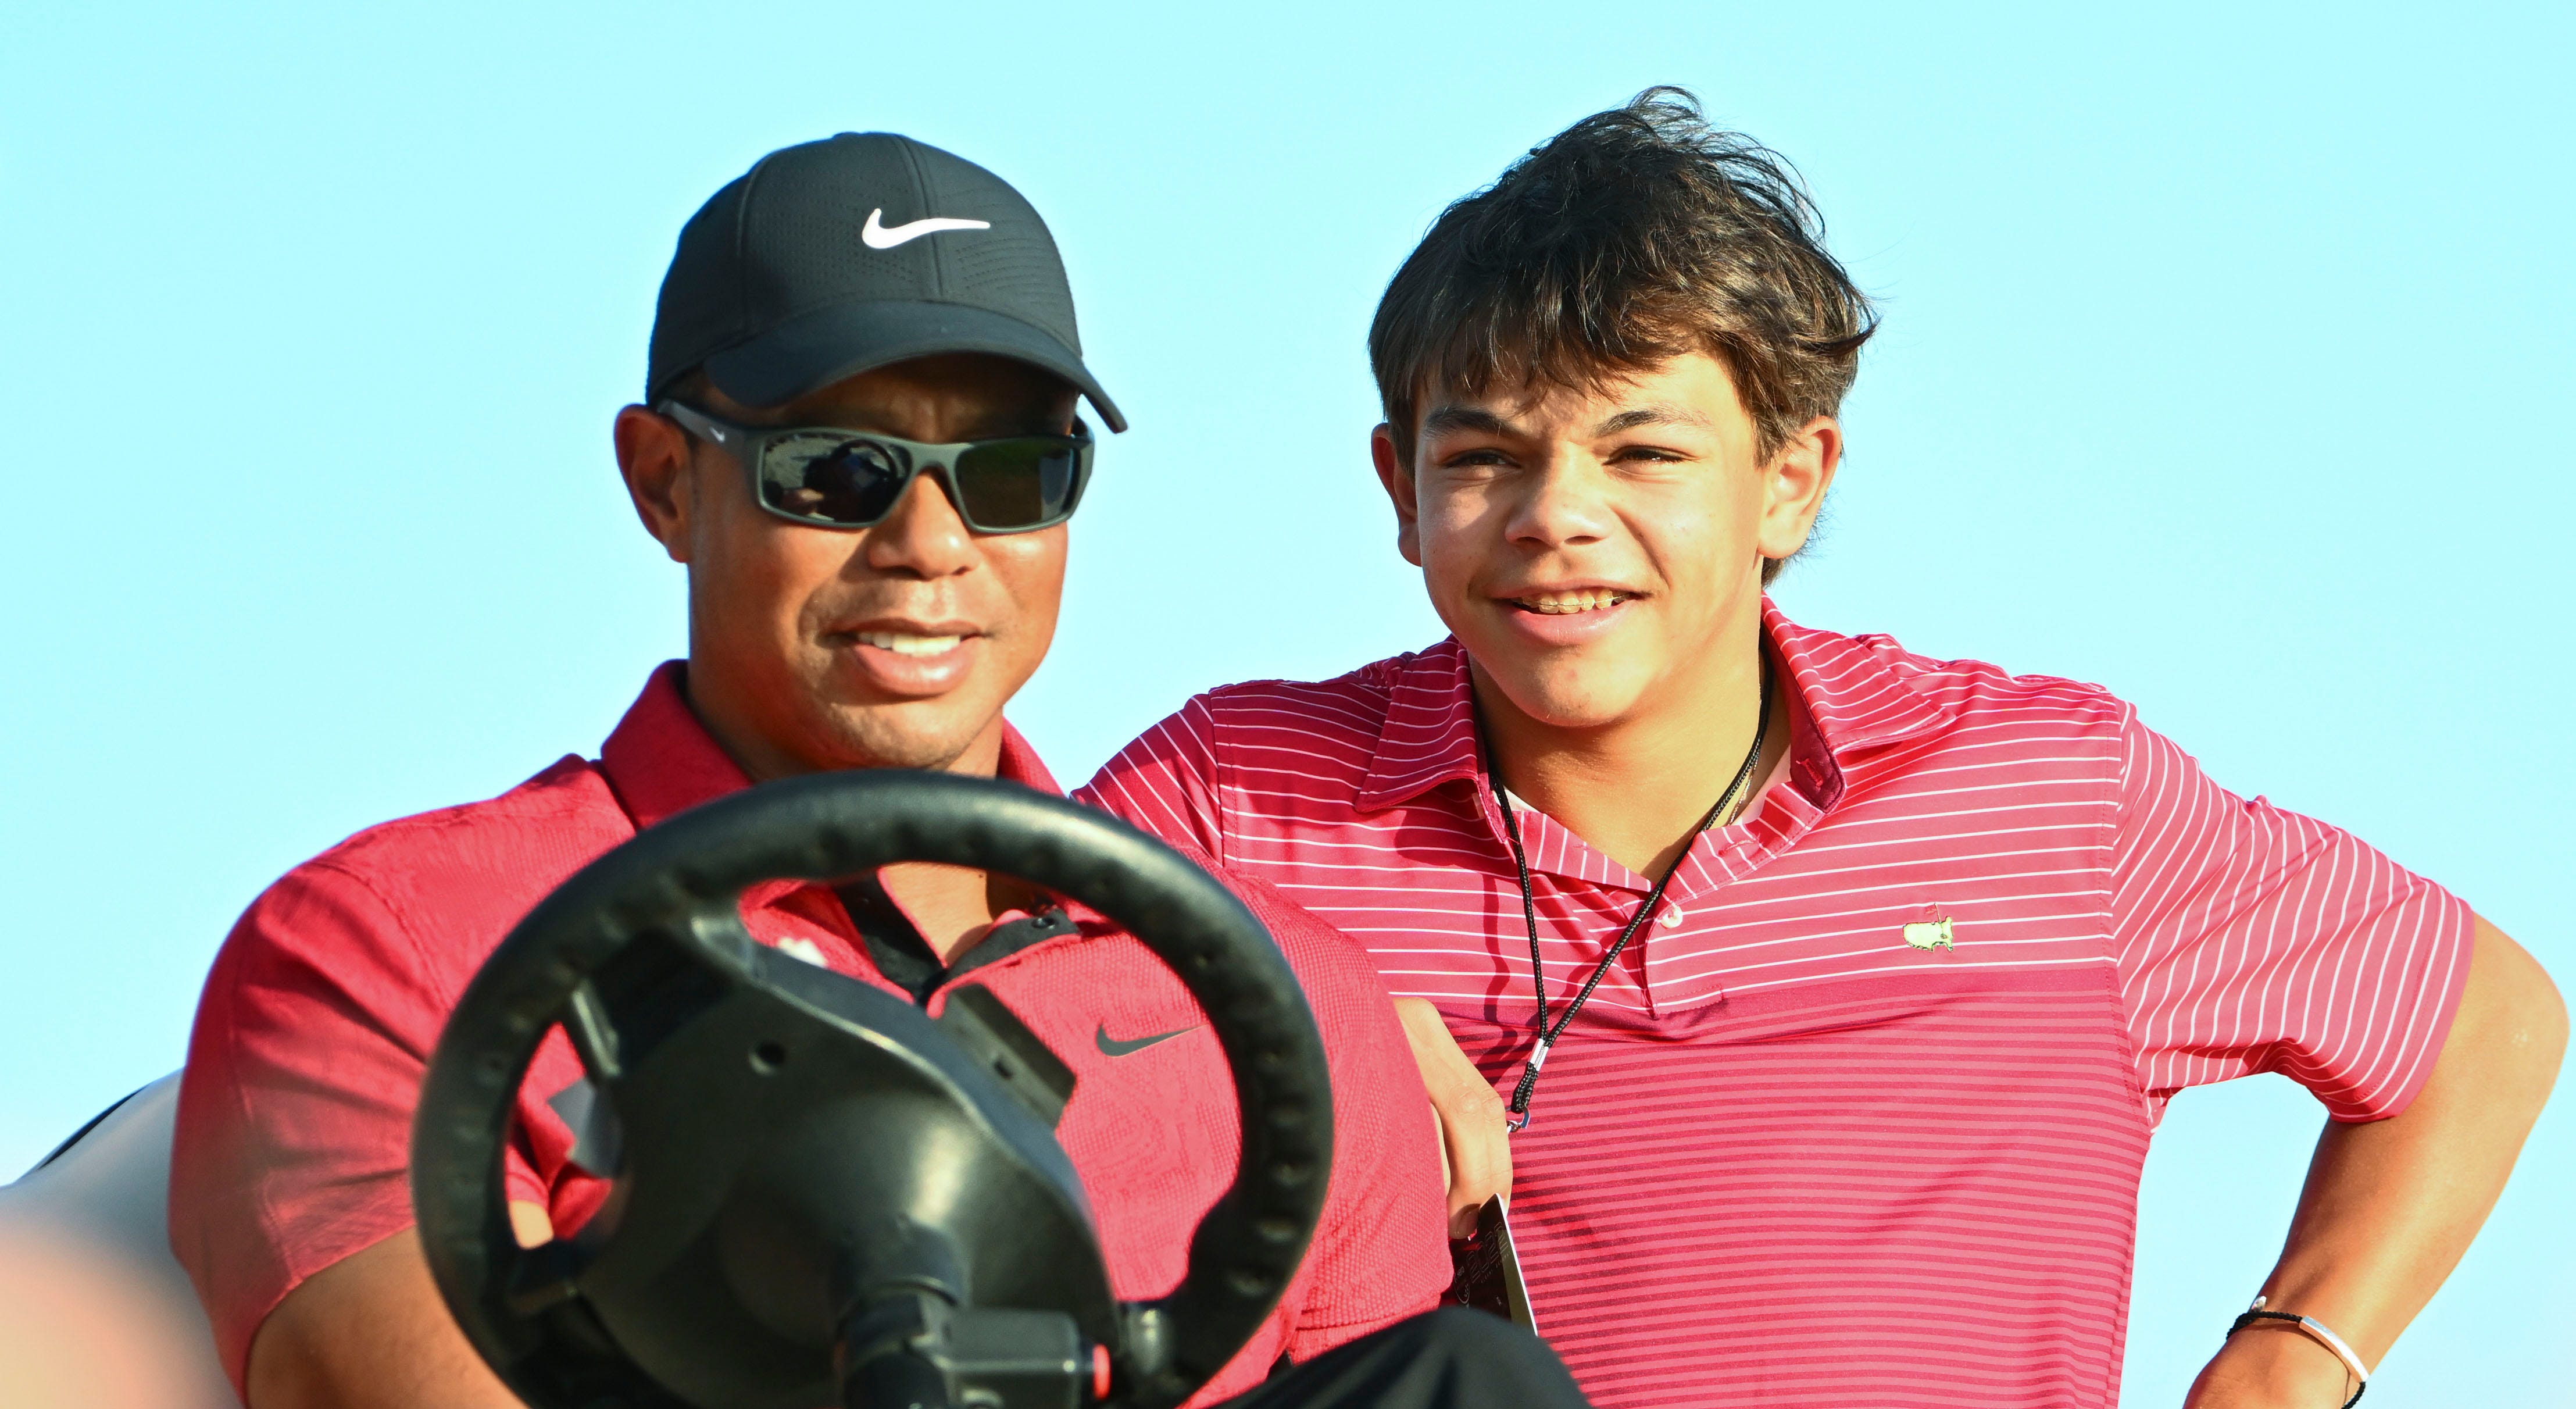 Tiger Woods reveals his son, Charlie, 13, is already outdriving him Fox News